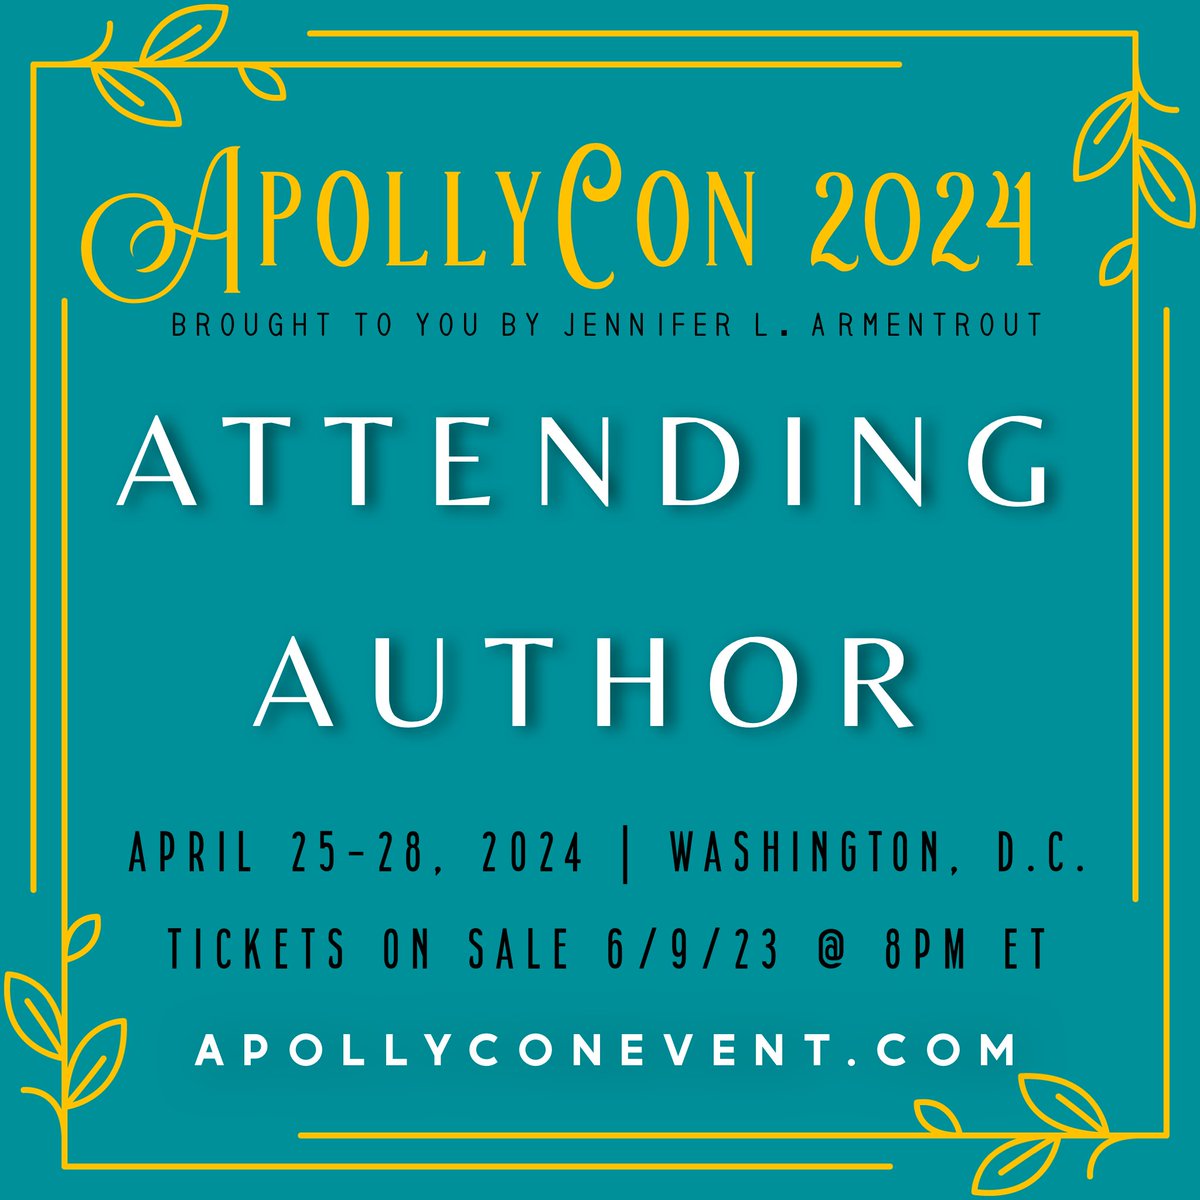 Look for tickets going on sale June 9! Follow @apollycon for updates #apollycon2024